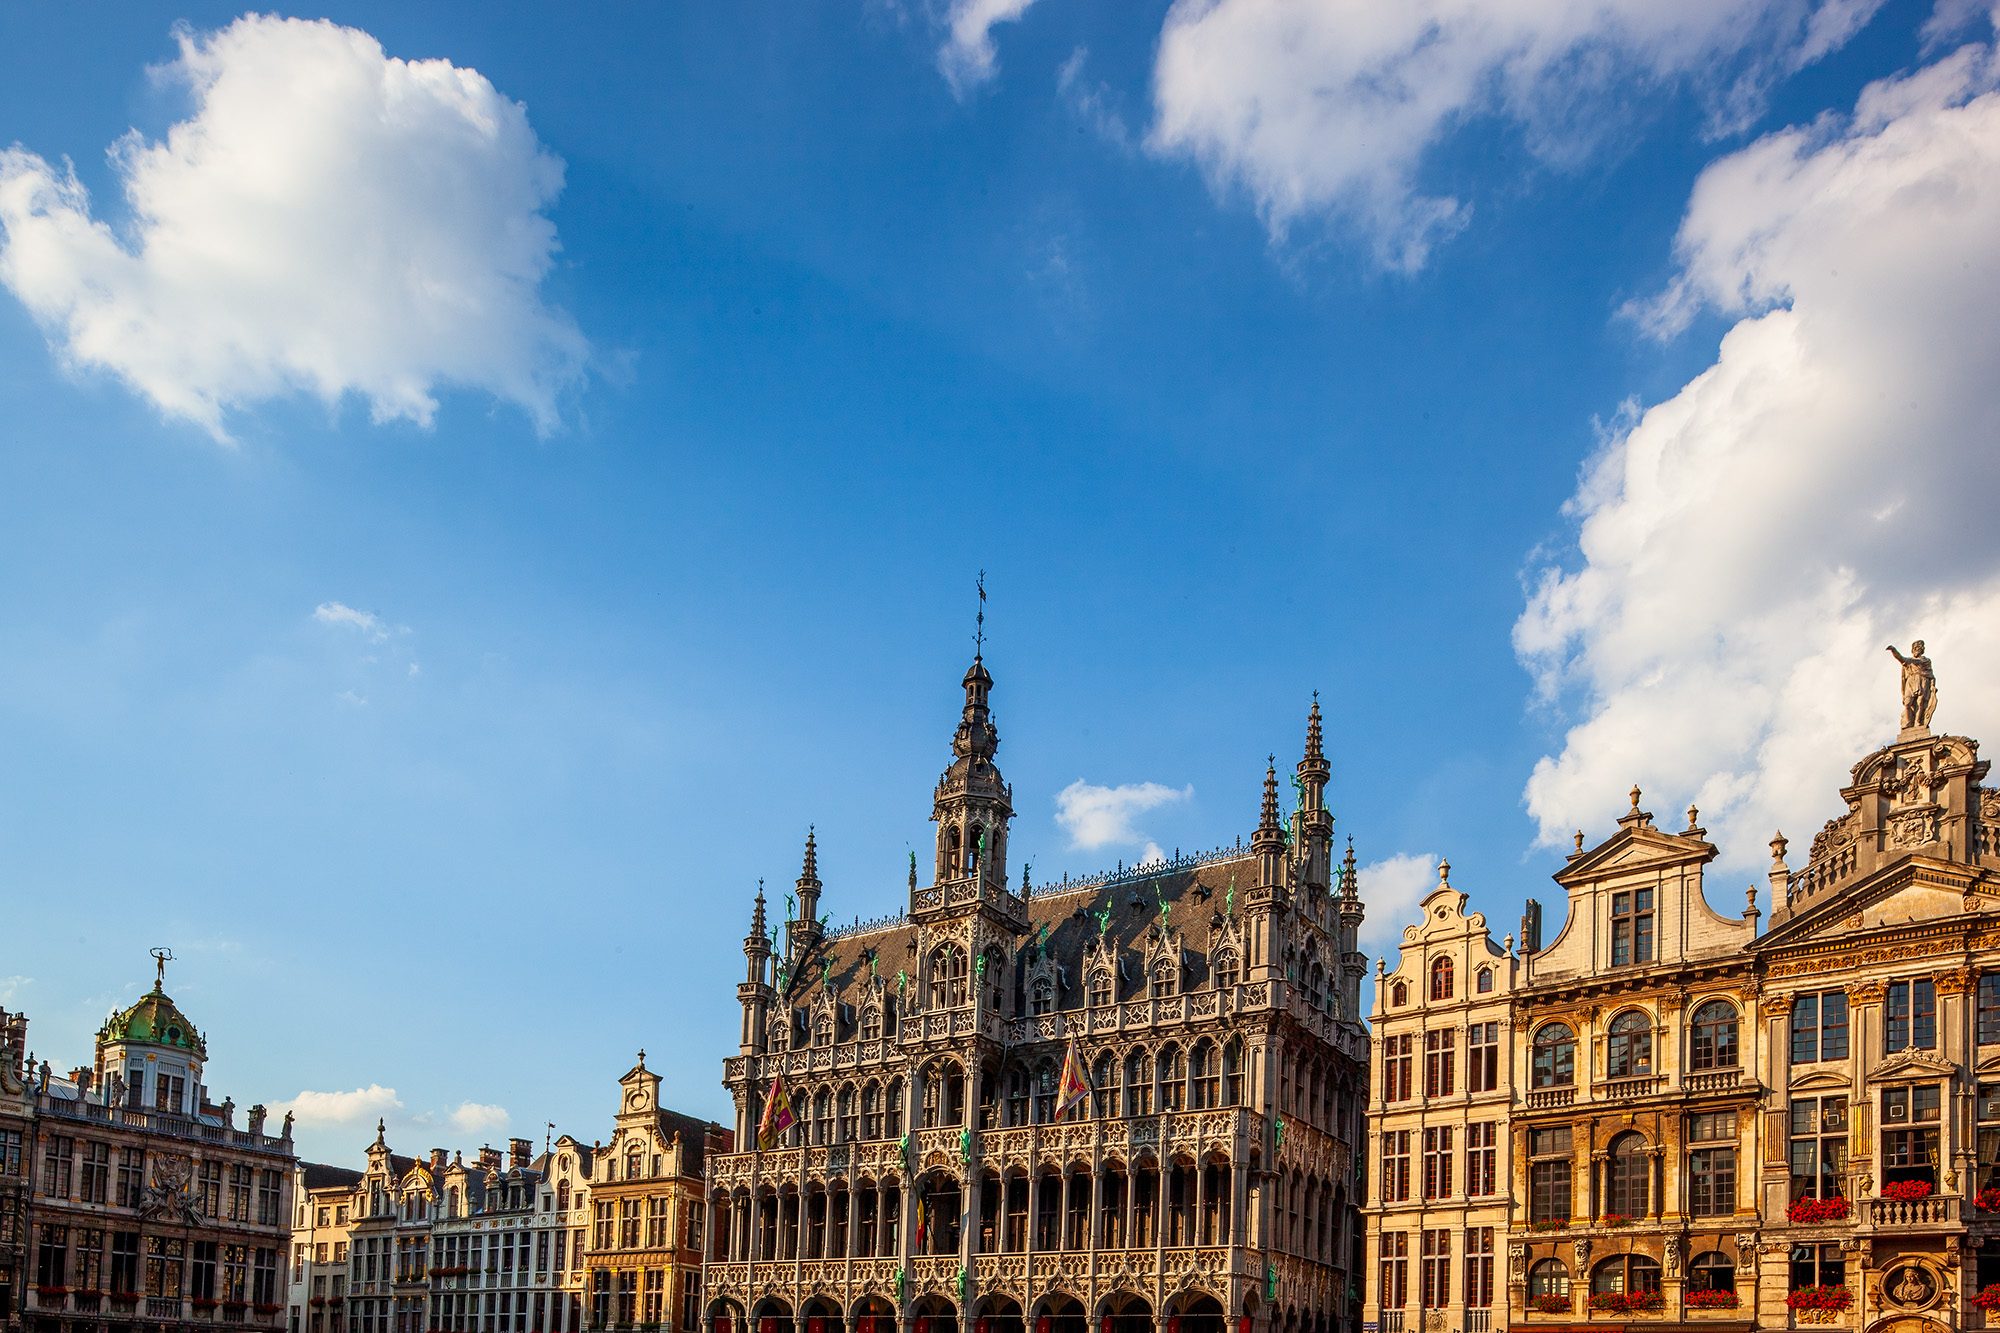 "Brussels Elegance: Grand Place Illumination" captures the architectural splendor of Grand Place in Brussels, Belgium. Sunlight...